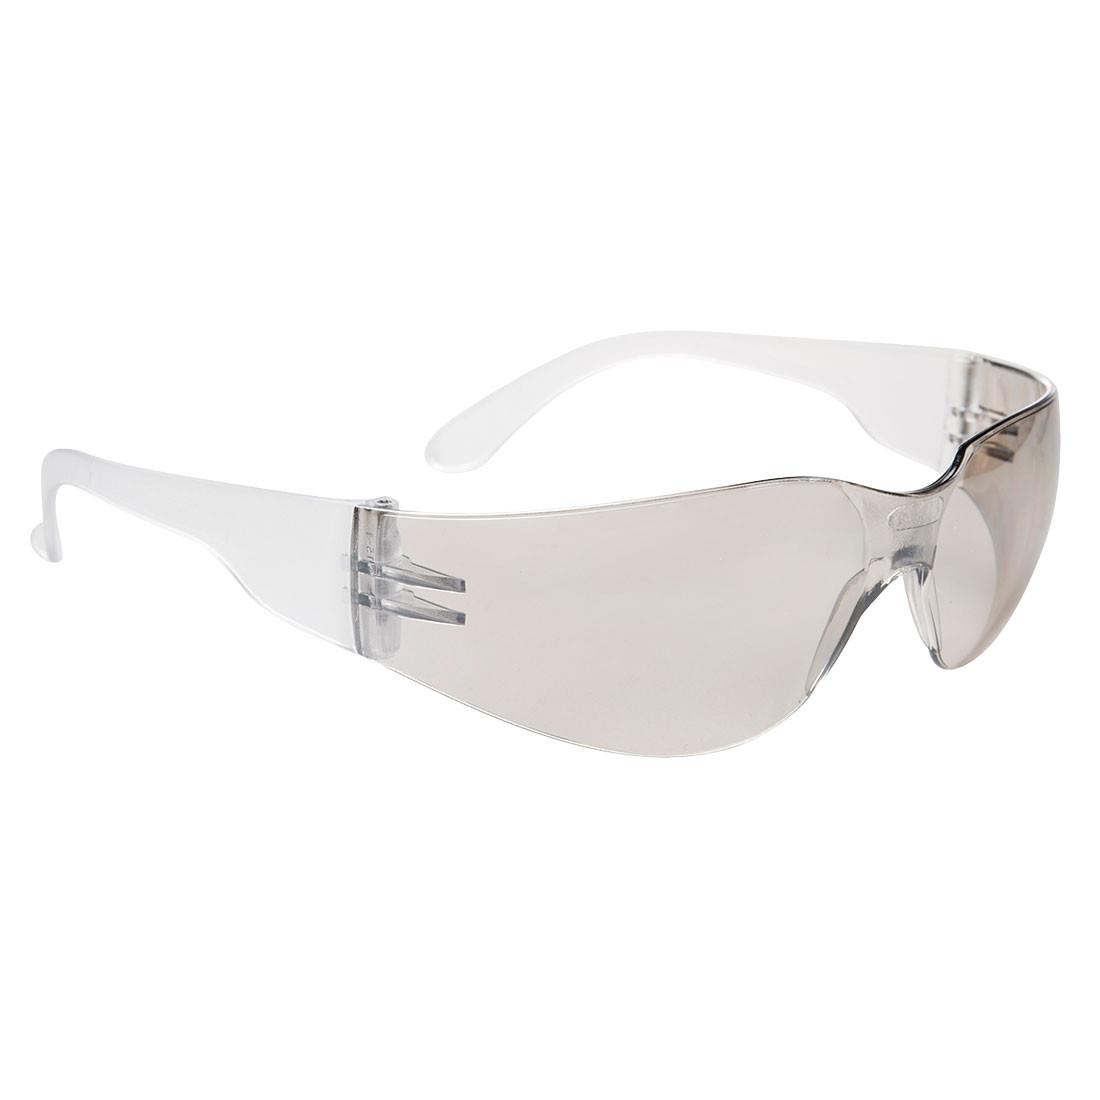 Portwest PW32MIR Wrap Around Spectacles; Clear (CL) Mirror